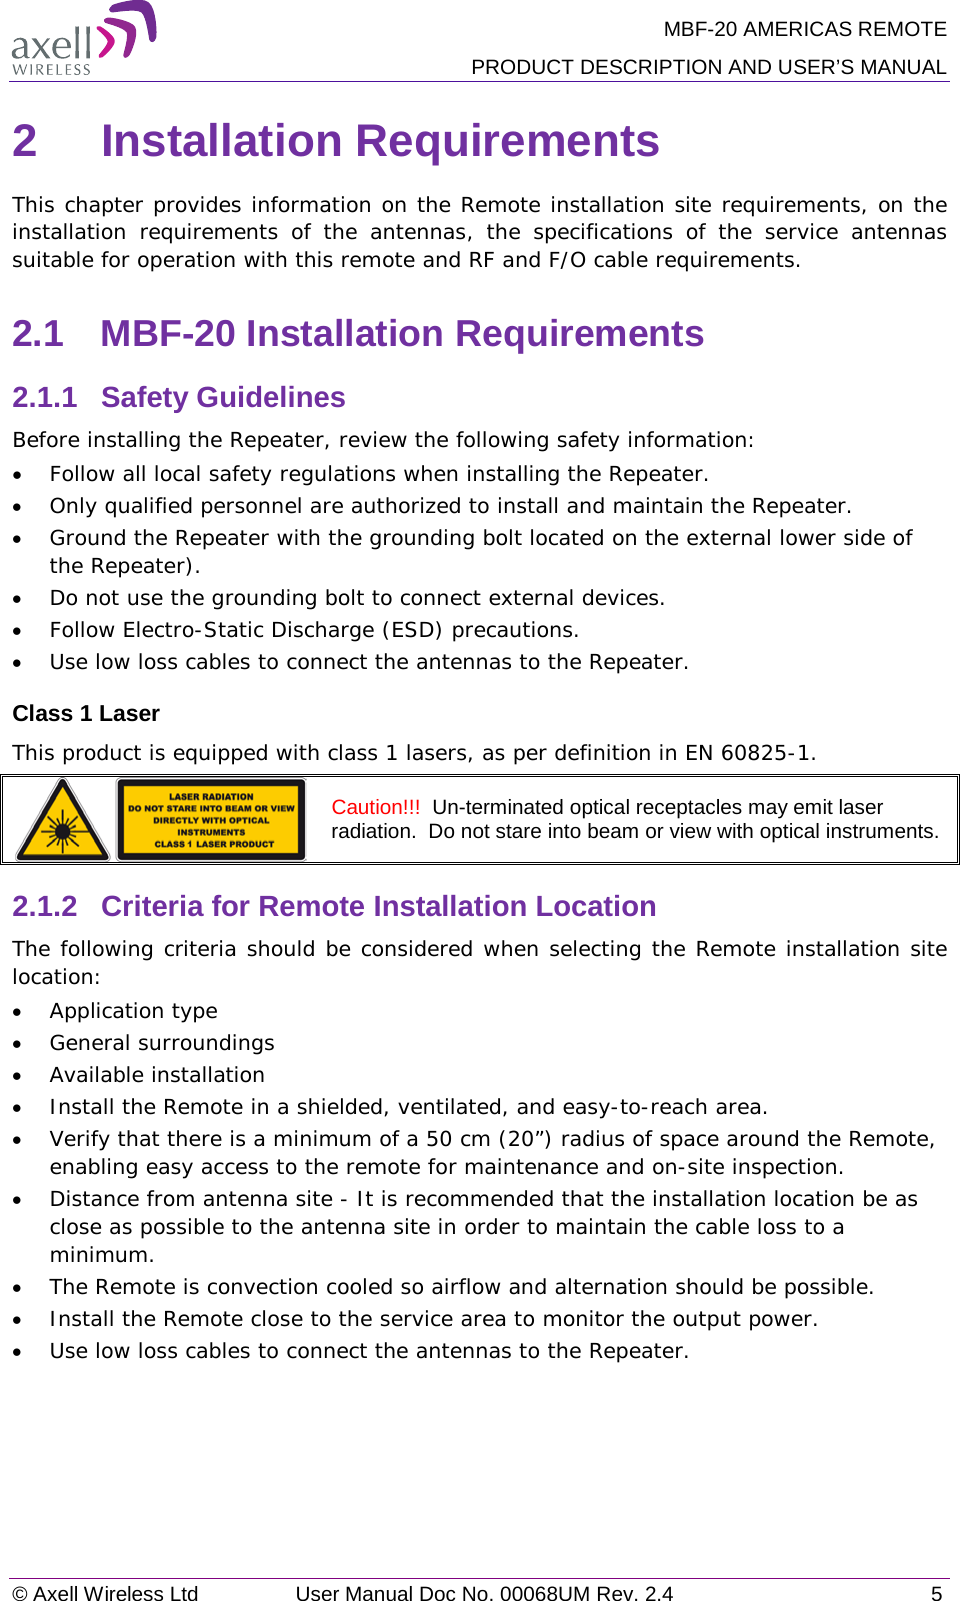 MBF-20 AMERICAS REMOTE PRODUCT DESCRIPTION AND USER’S MANUAL © Axell Wireless Ltd User Manual Doc No. 00068UM Rev. 2.4  5  2  Installation Requirements This chapter provides information on the Remote installation site requirements, on the installation  requirements of the antennas,  the specifications of the service antennas suitable for operation with this remote and RF and F/O cable requirements. 2.1  MBF-20 Installation Requirements 2.1.1  Safety Guidelines Before installing the Repeater, review the following safety information:  • Follow all local safety regulations when installing the Repeater. • Only qualified personnel are authorized to install and maintain the Repeater. • Ground the Repeater with the grounding bolt located on the external lower side of the Repeater). • Do not use the grounding bolt to connect external devices. • Follow Electro-Static Discharge (ESD) precautions. • Use low loss cables to connect the antennas to the Repeater. Class 1 Laser This product is equipped with class 1 lasers, as per definition in EN 60825-1.   Caution!!!  Un-terminated optical receptacles may emit laser radiation.  Do not stare into beam or view with optical instruments. 2.1.2  Criteria for Remote Installation Location The following criteria should be considered when selecting the Remote installation site location: • Application type • General surroundings • Available installation • Install the Remote in a shielded, ventilated, and easy-to-reach area. • Verify that there is a minimum of a 50 cm (20”) radius of space around the Remote, enabling easy access to the remote for maintenance and on-site inspection. • Distance from antenna site - It is recommended that the installation location be as close as possible to the antenna site in order to maintain the cable loss to a minimum. • The Remote is convection cooled so airflow and alternation should be possible. • Install the Remote close to the service area to monitor the output power. • Use low loss cables to connect the antennas to the Repeater.   